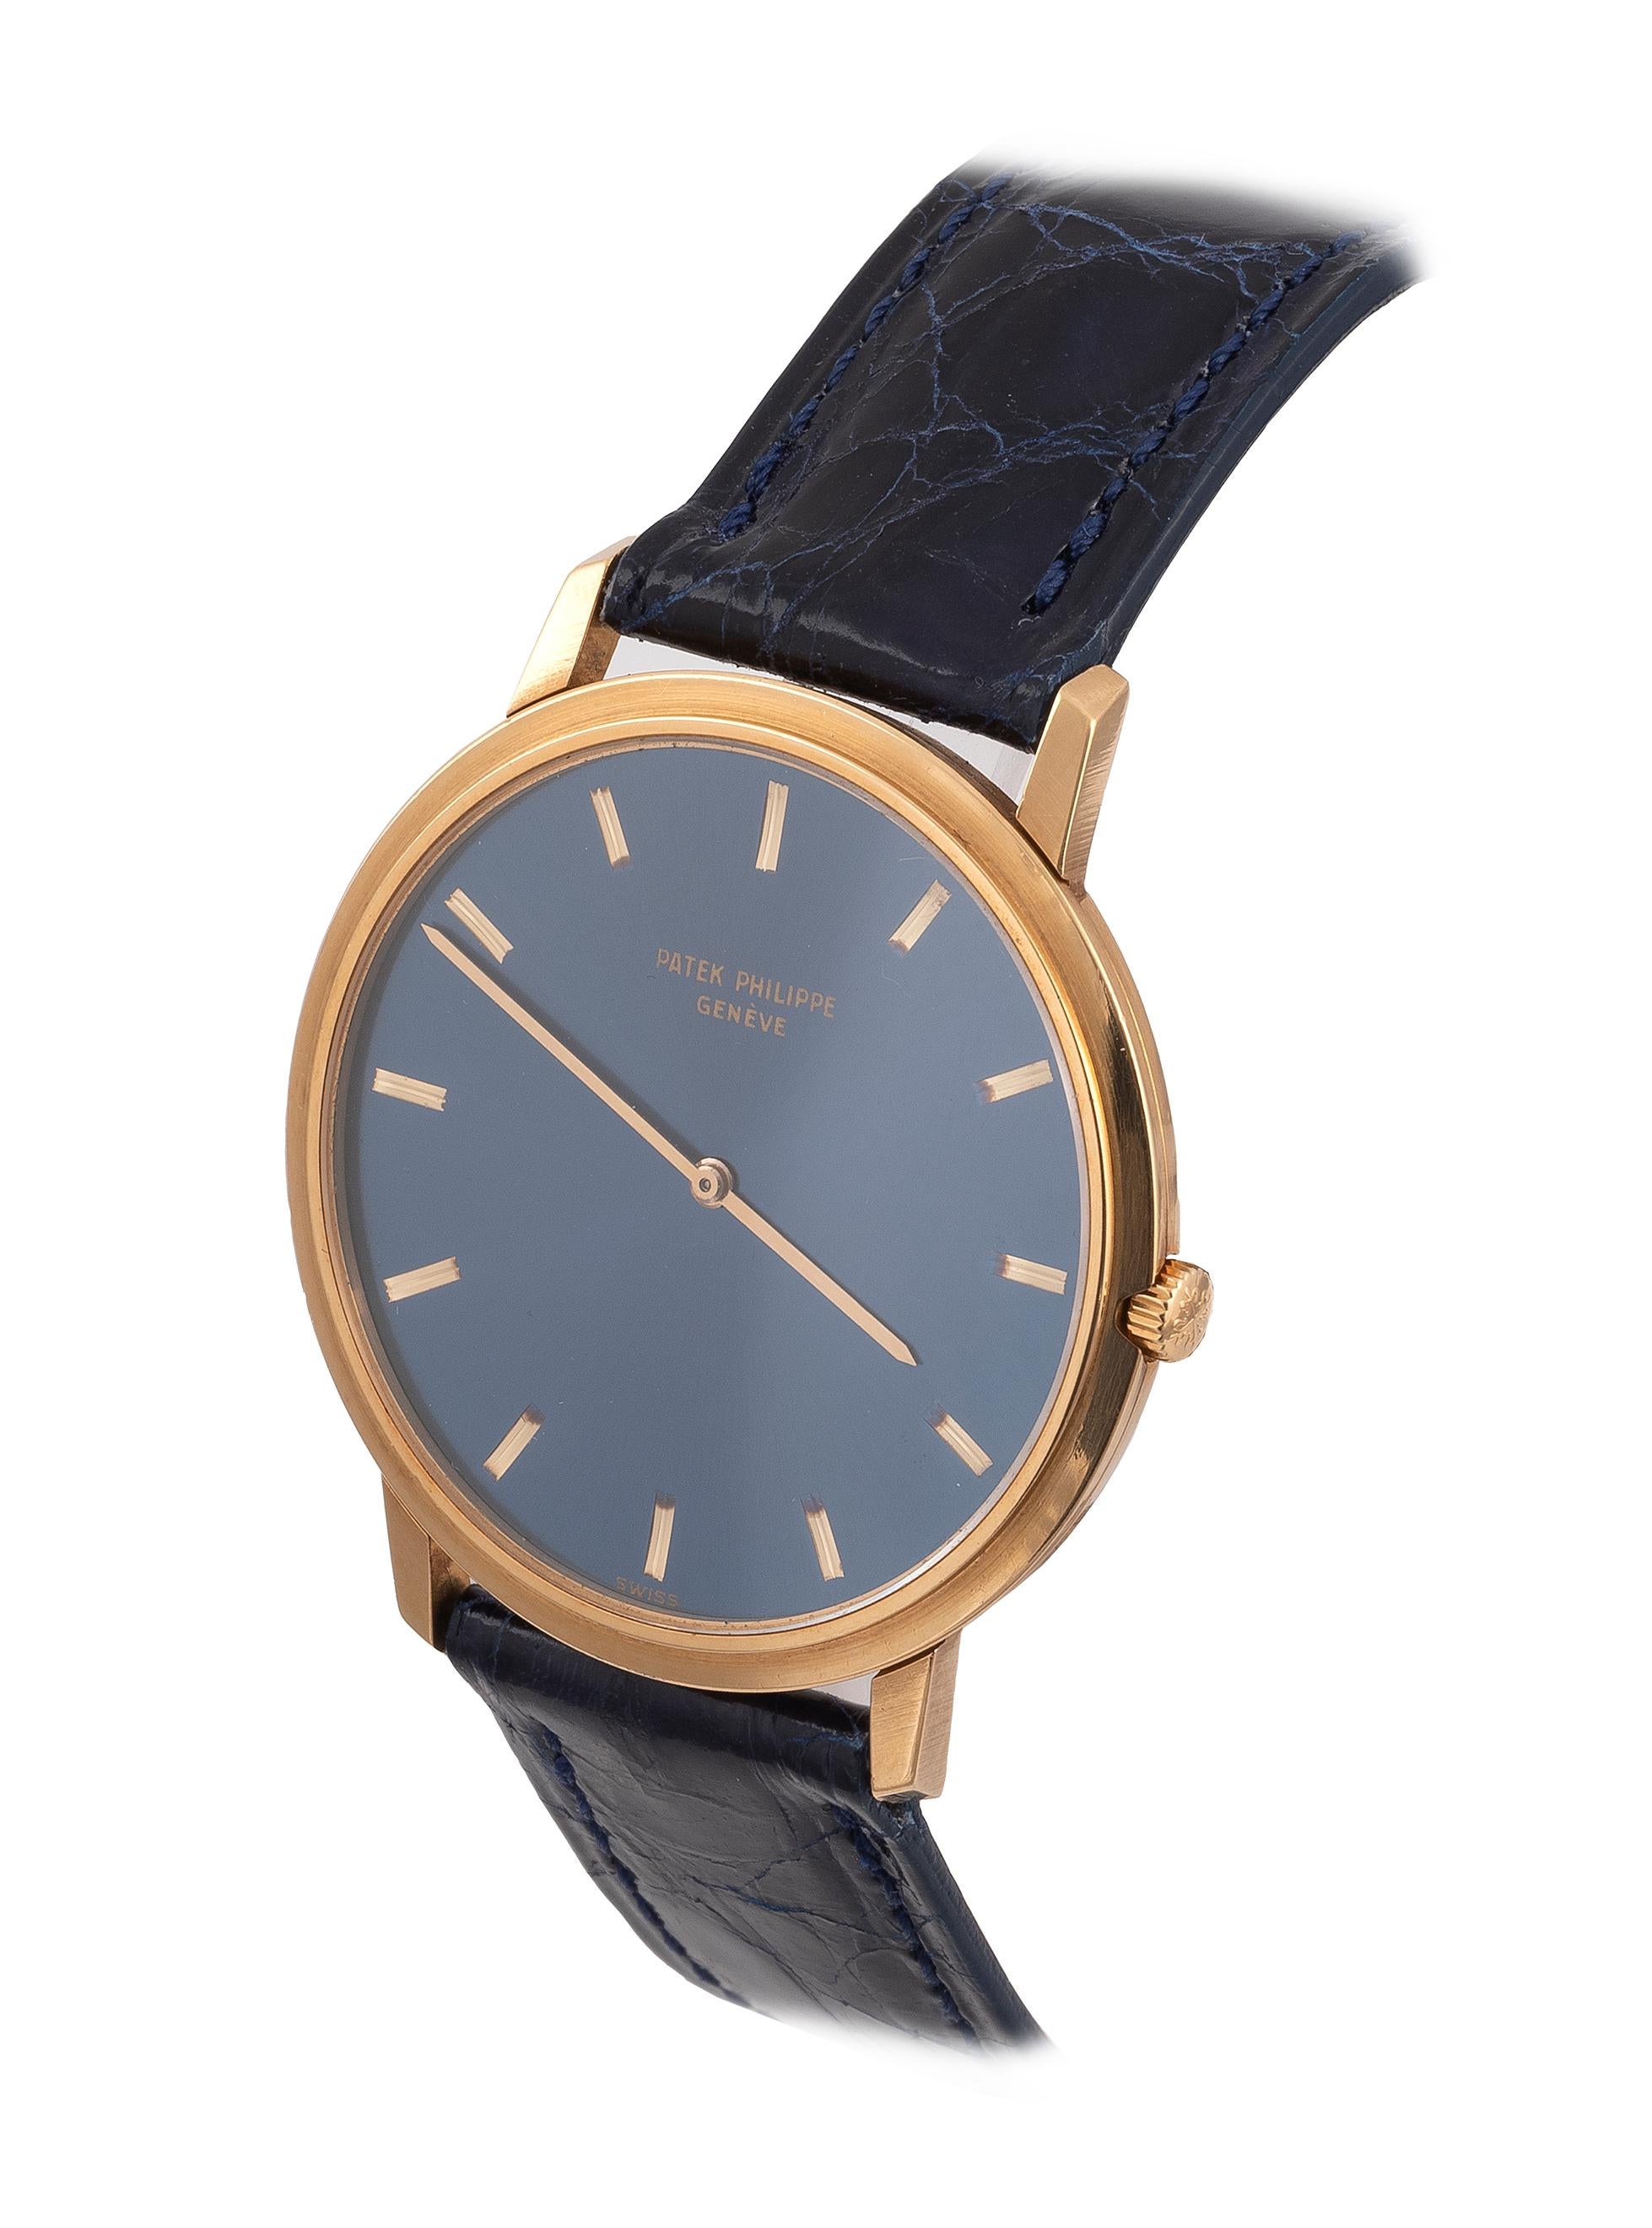 Very fine, thin, self-winding, 18K yellow gold wristwatch.
Case three-body, solid, polished and brushed, stepped inclined bezel, lapidated lugs, recessed winding crown, sapphire crystal. Dial satine blue with engraved gold fl uted baton indexes.